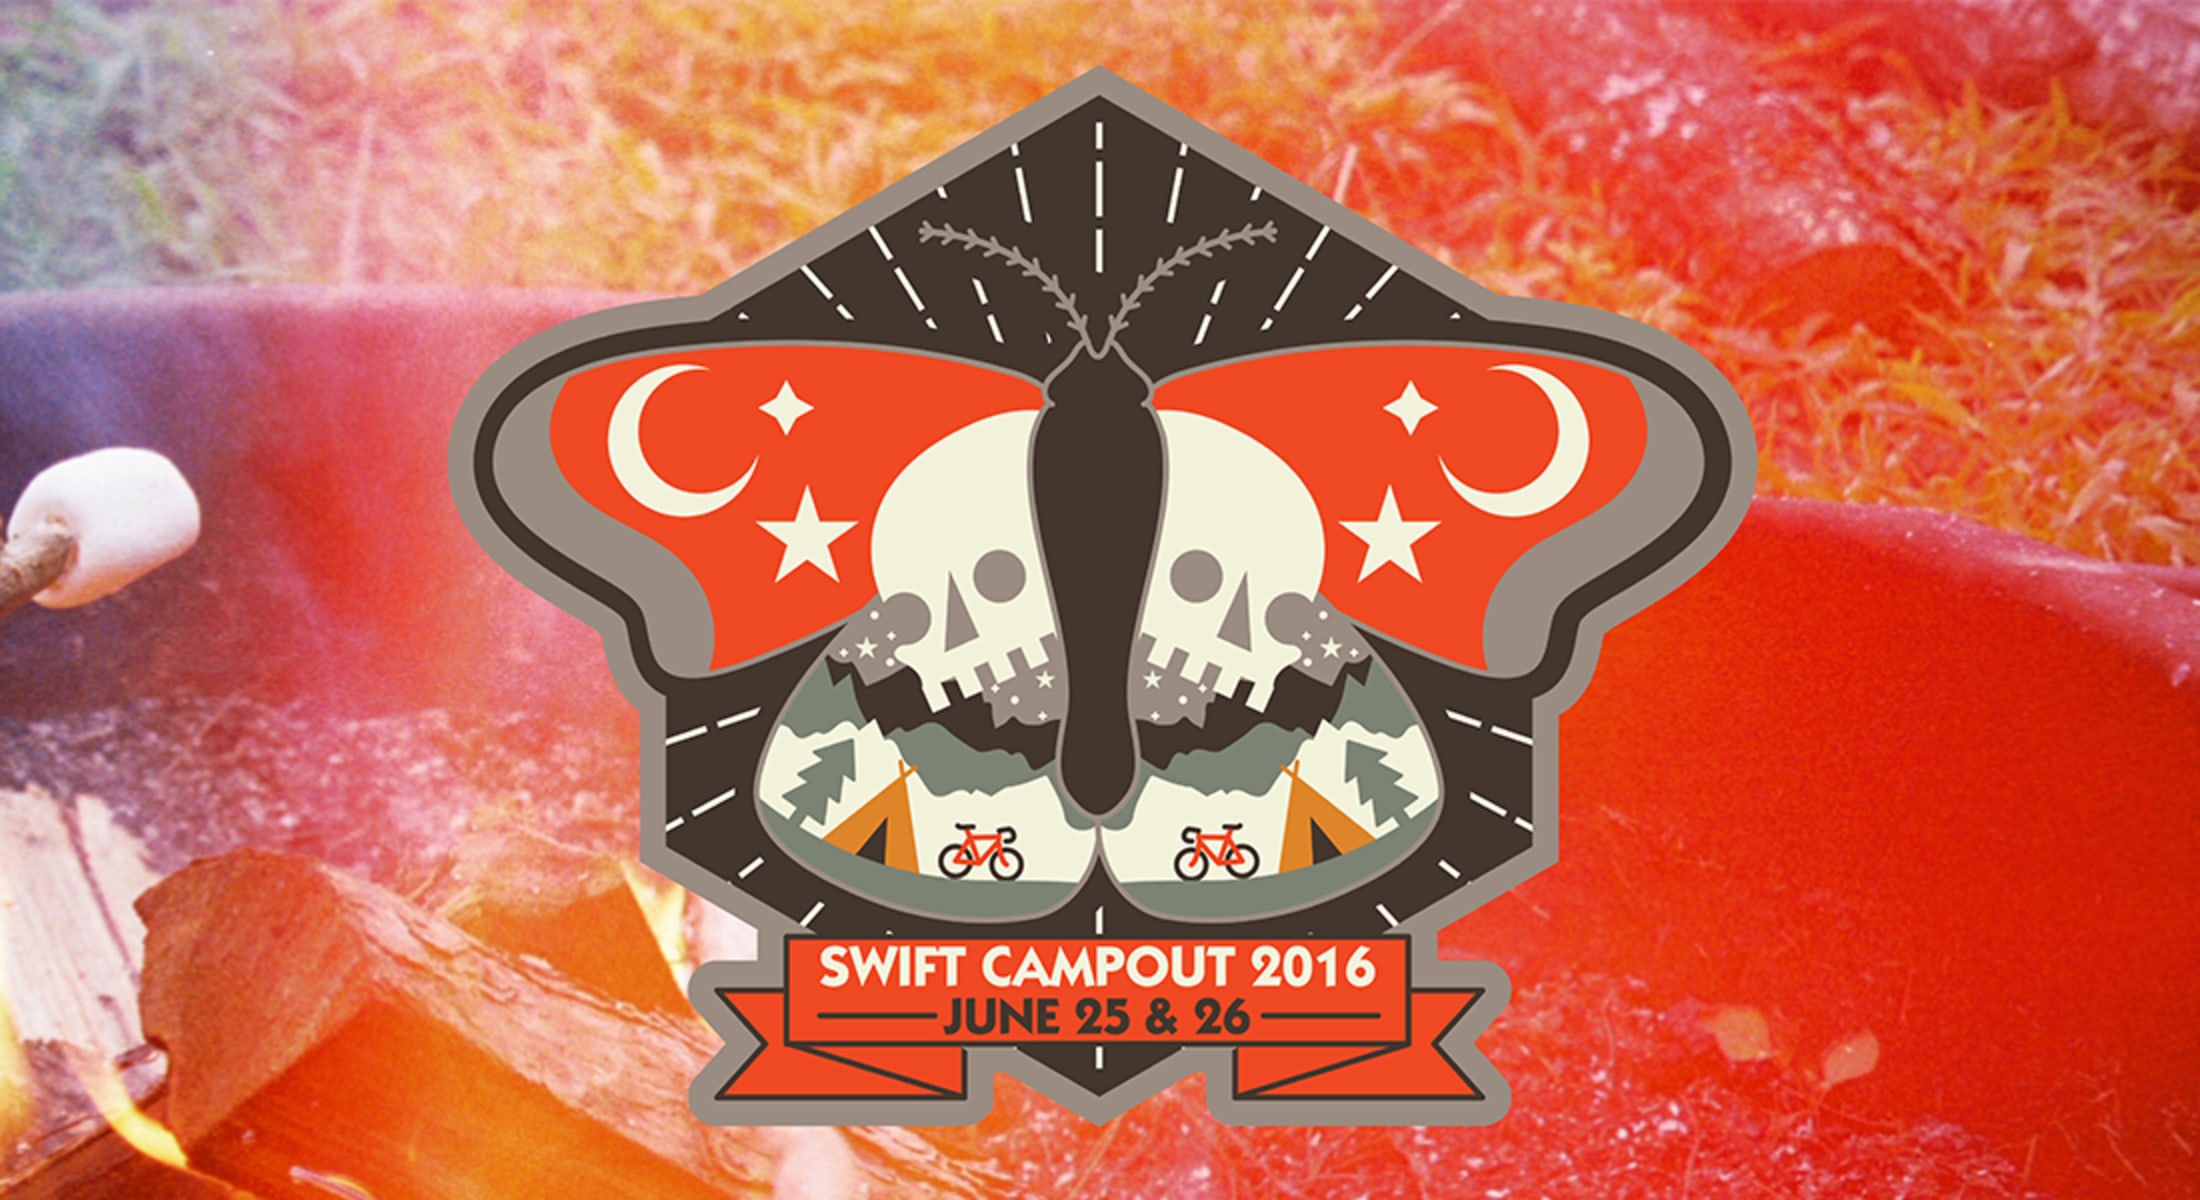 Hipcamp + Swift Campout 2016